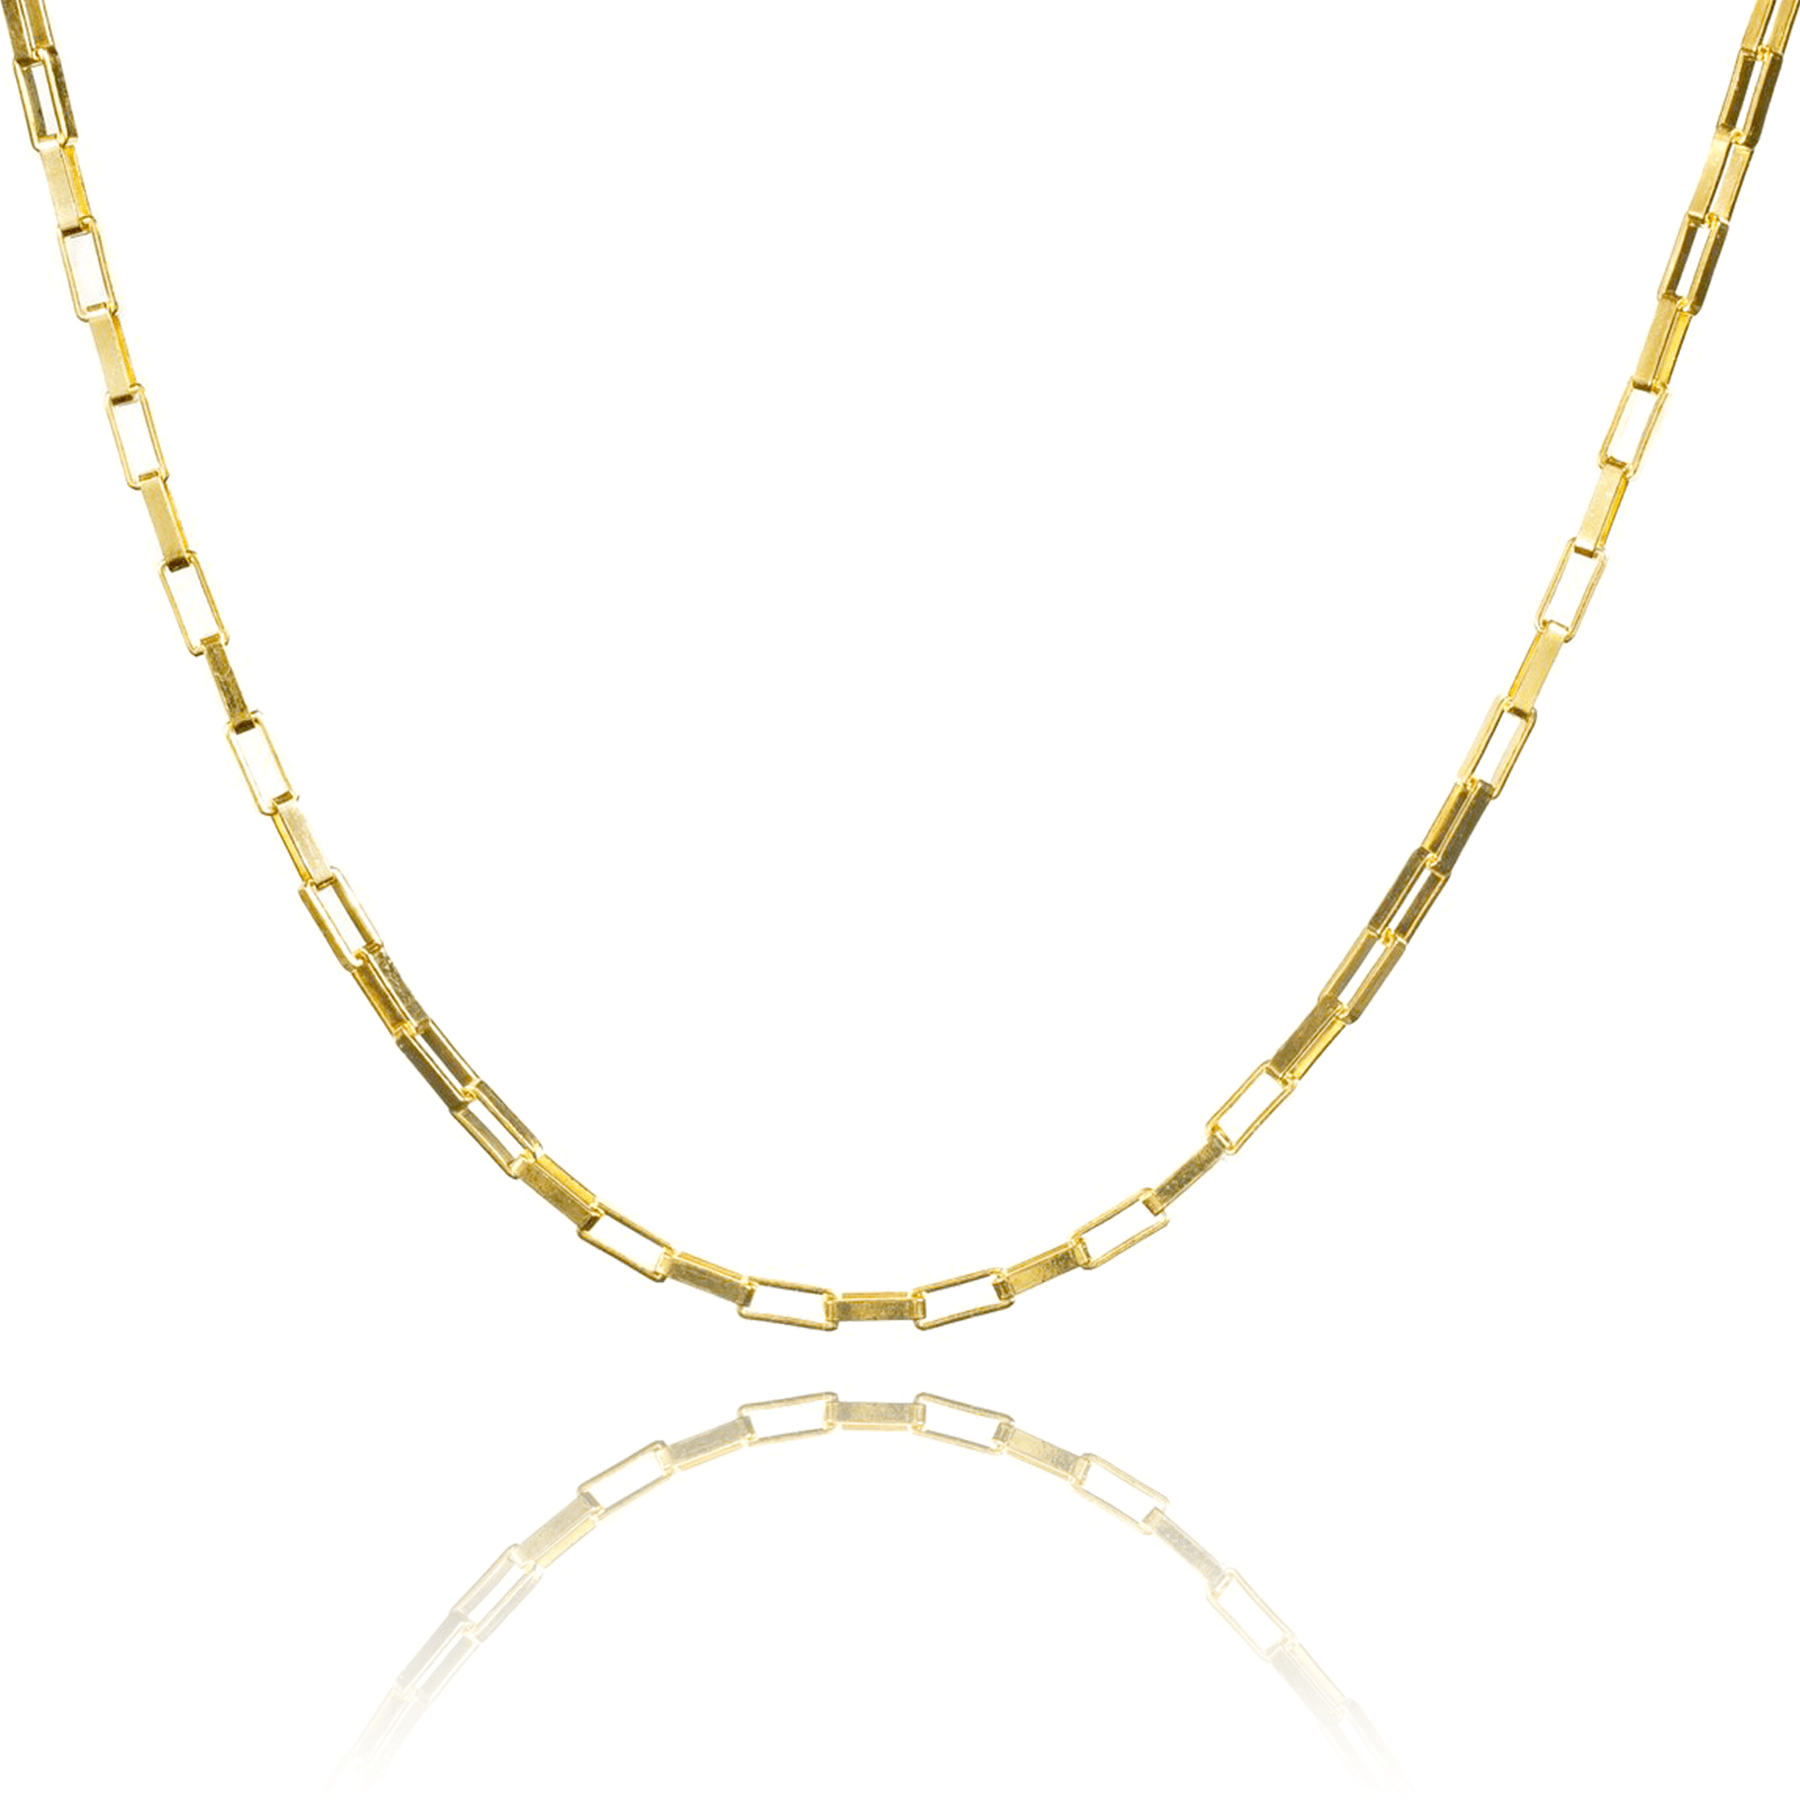 Align Necklace on white background